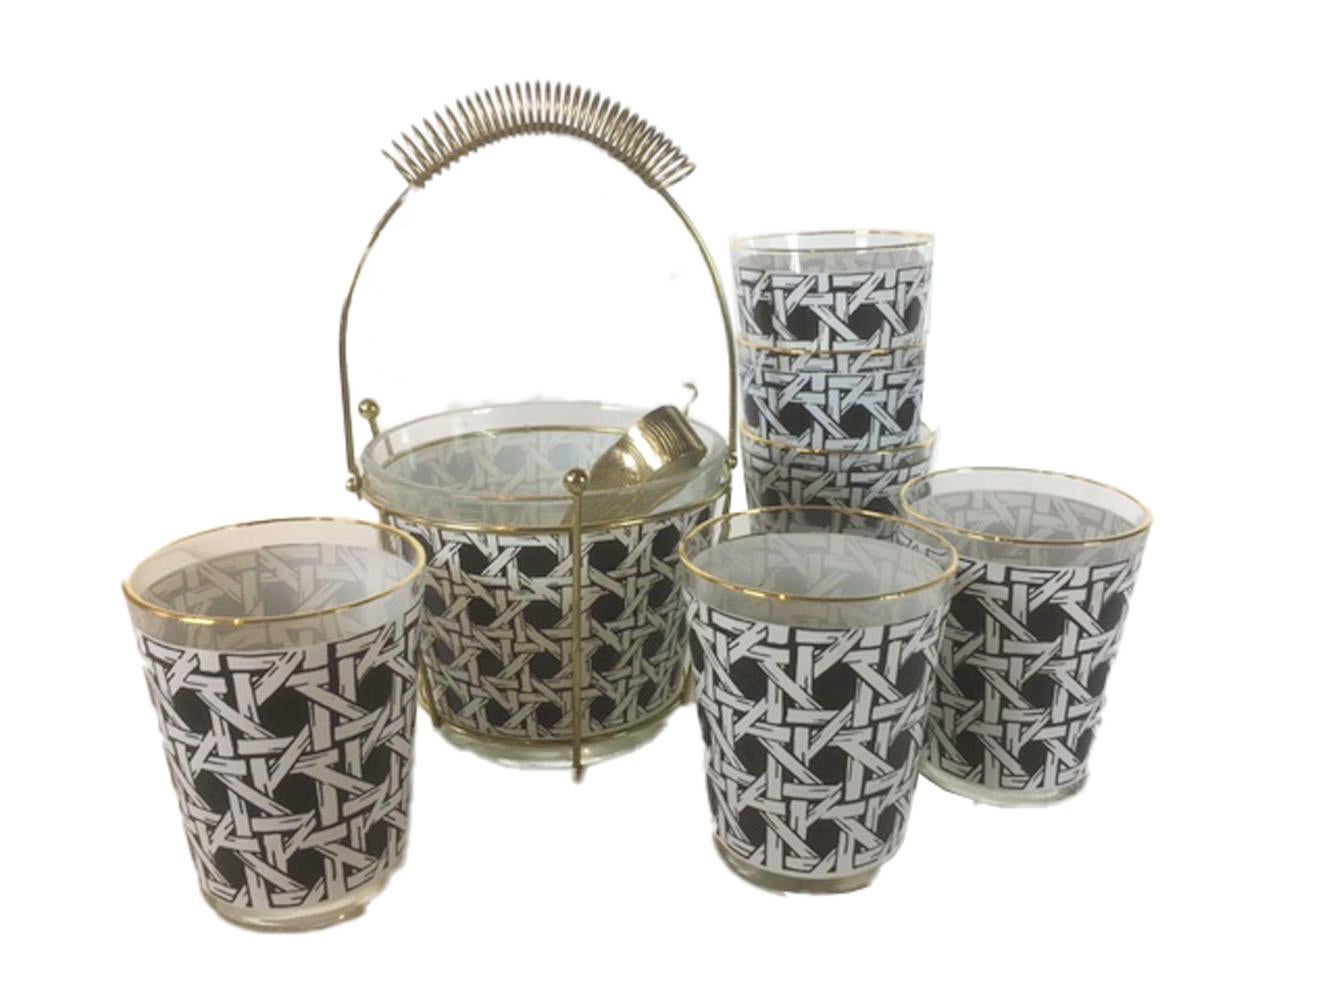 Vintage set of 36 double old fashioned glasses together with an Ice bowl with tong in caddy. All pieces decorated in black and white cane pattern with all glasses having a gold edged rim. In the Style of Georges Briard. All in excellent